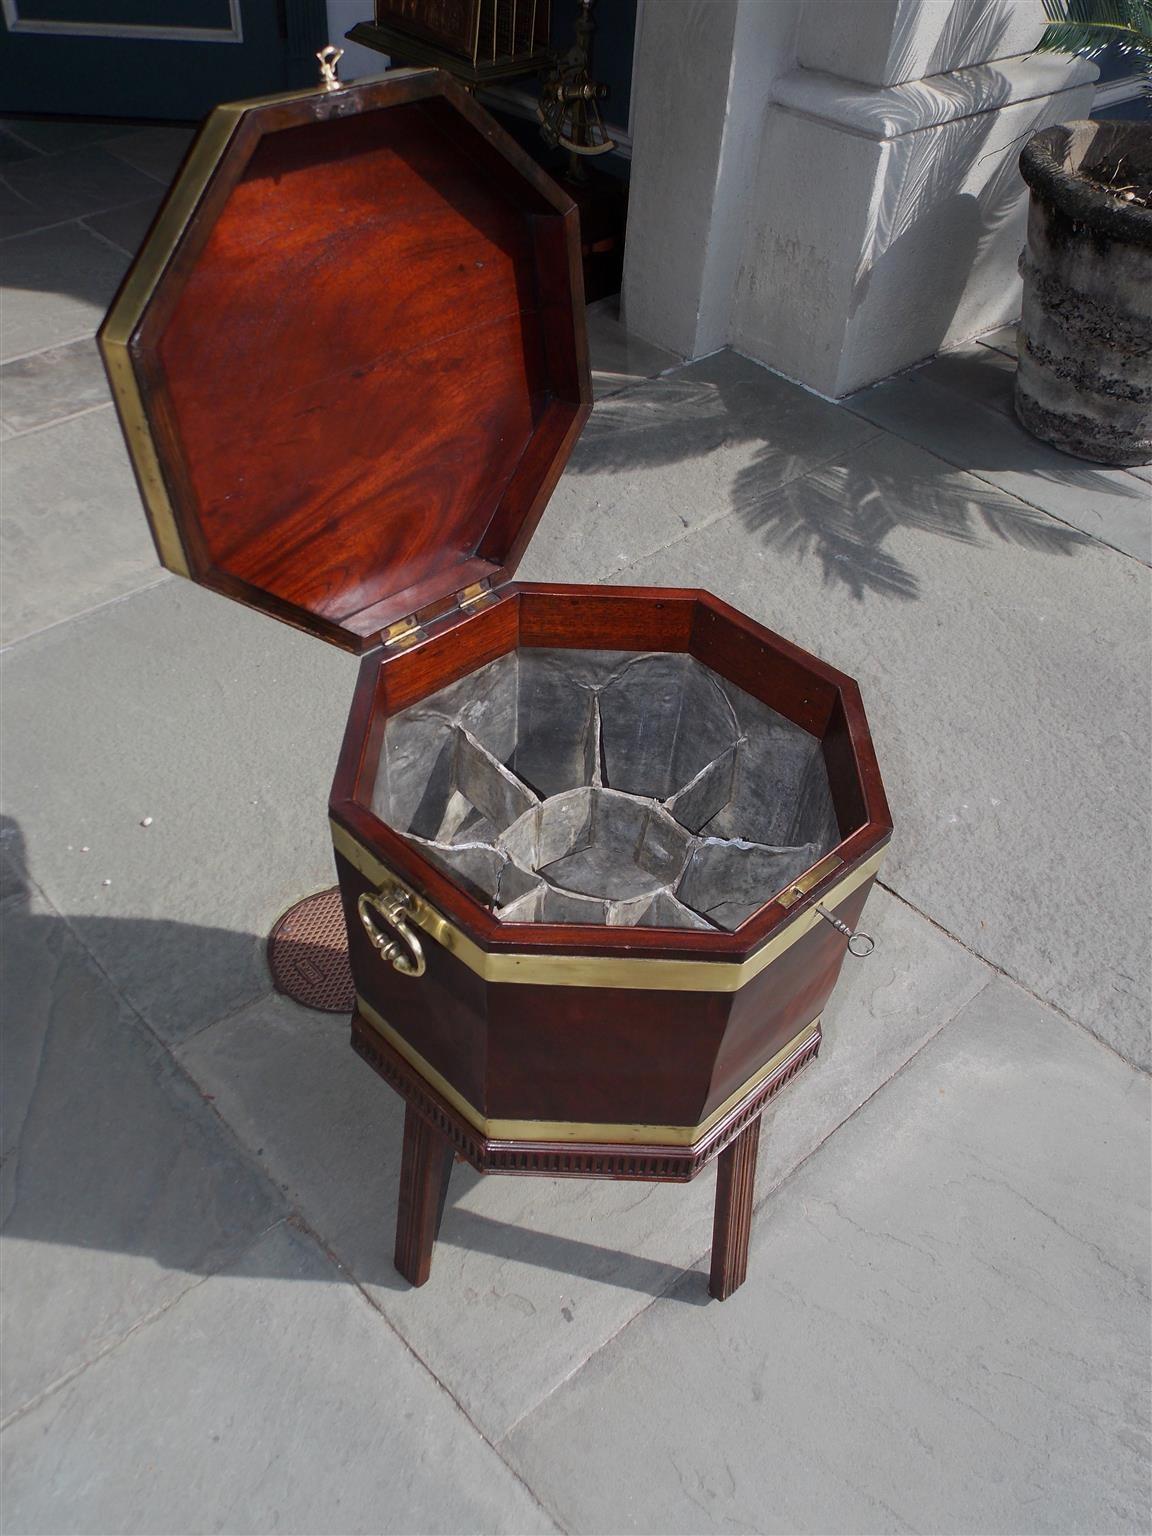 Early 19th Century English Regency Mahogany Octagon Brass Banded Wine Cellarette on Stand, C. 1810